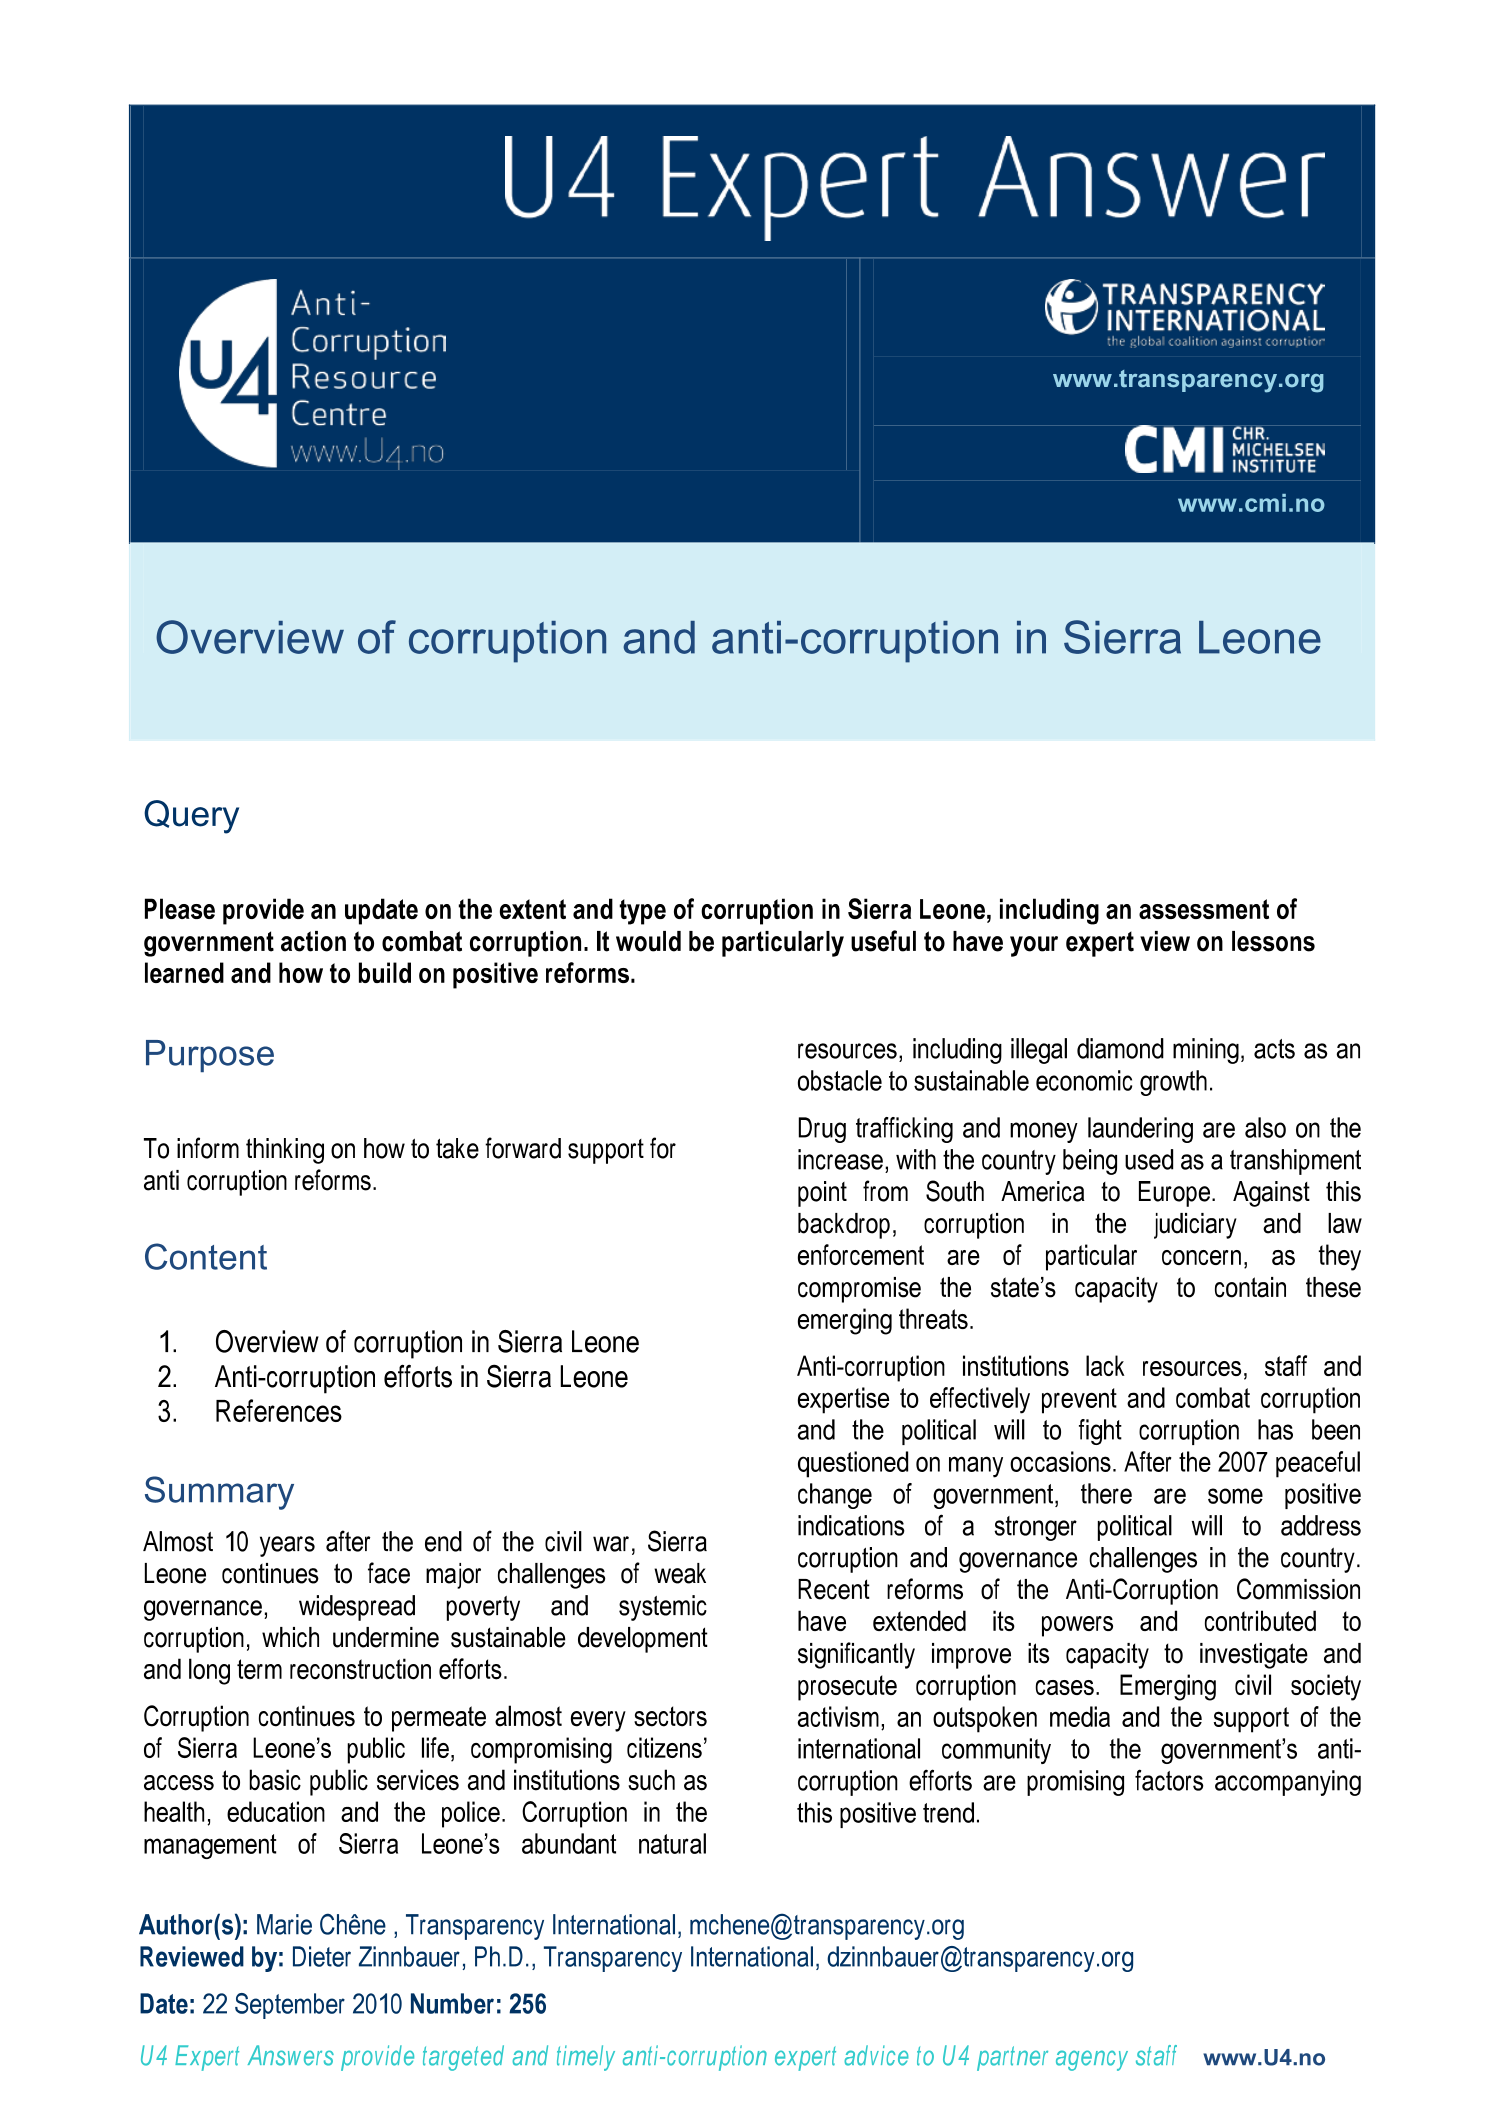 Overview of corruption and anti-corruption in Sierra Leone